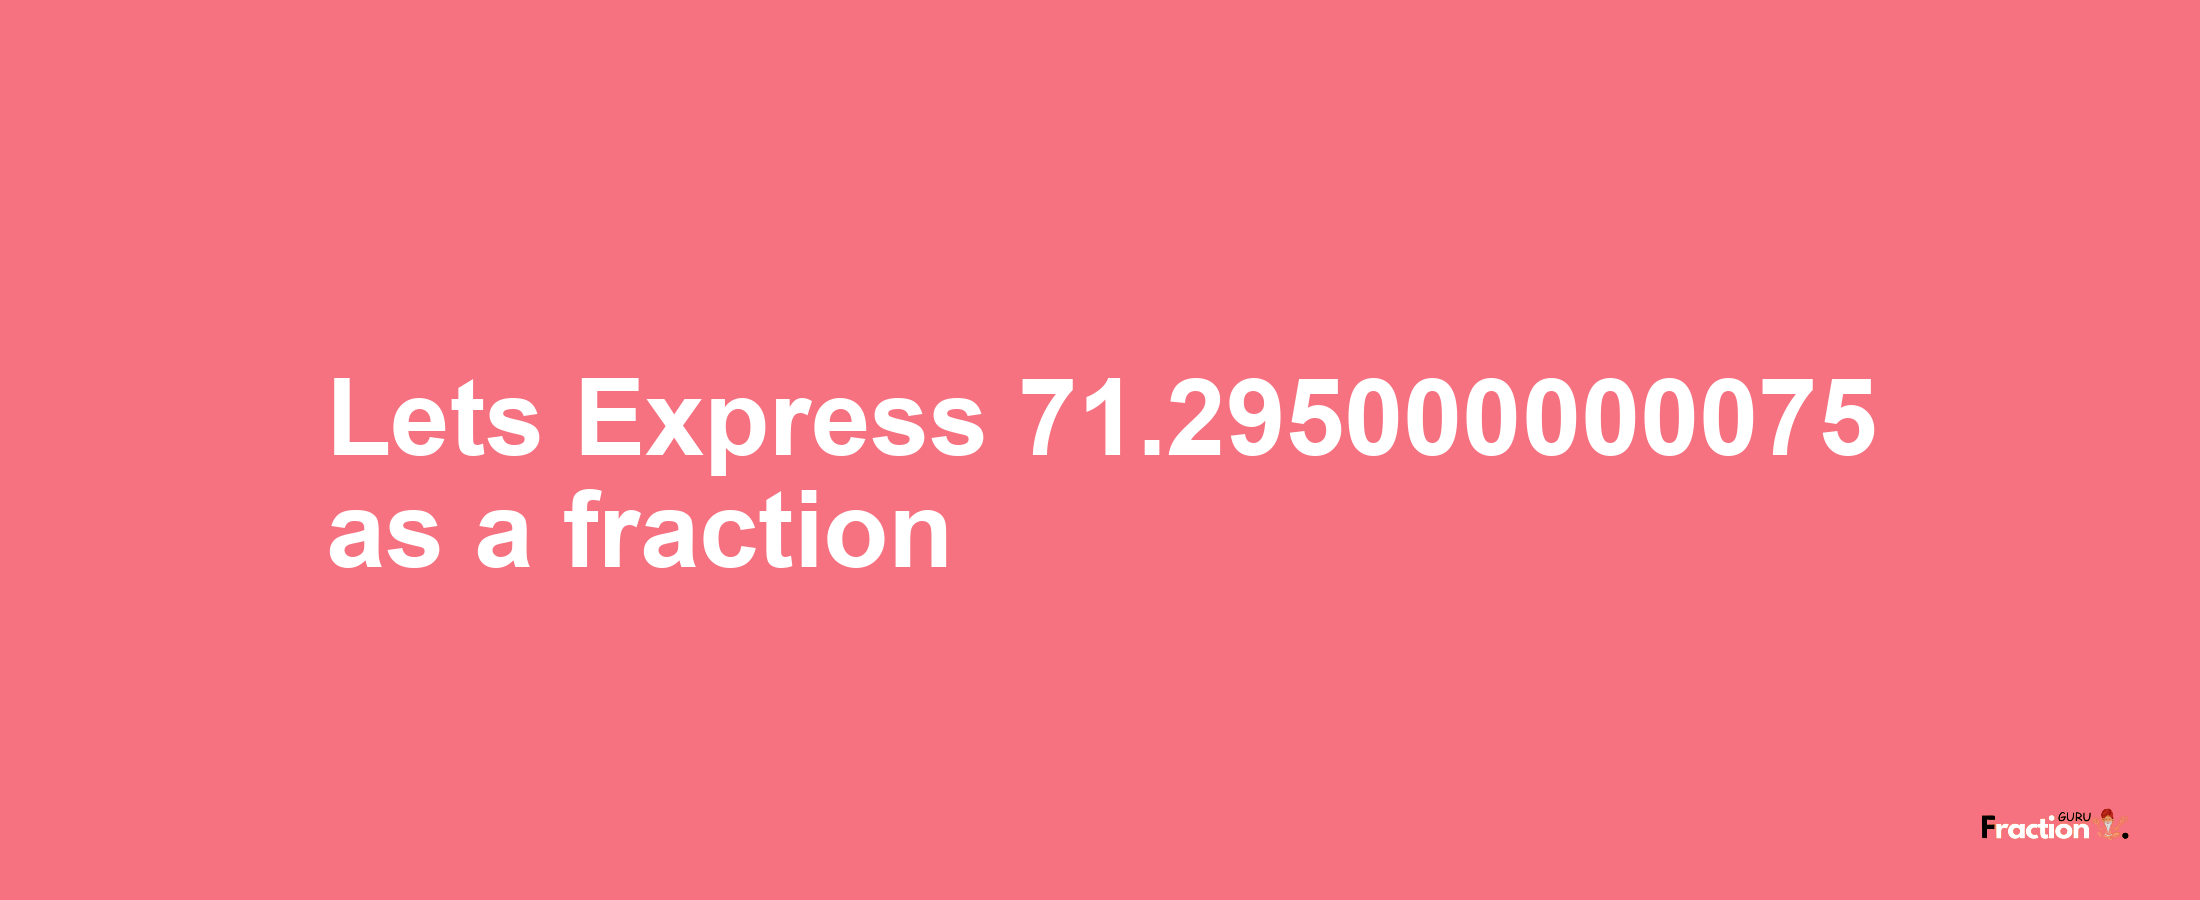 Lets Express 71.295000000075 as afraction